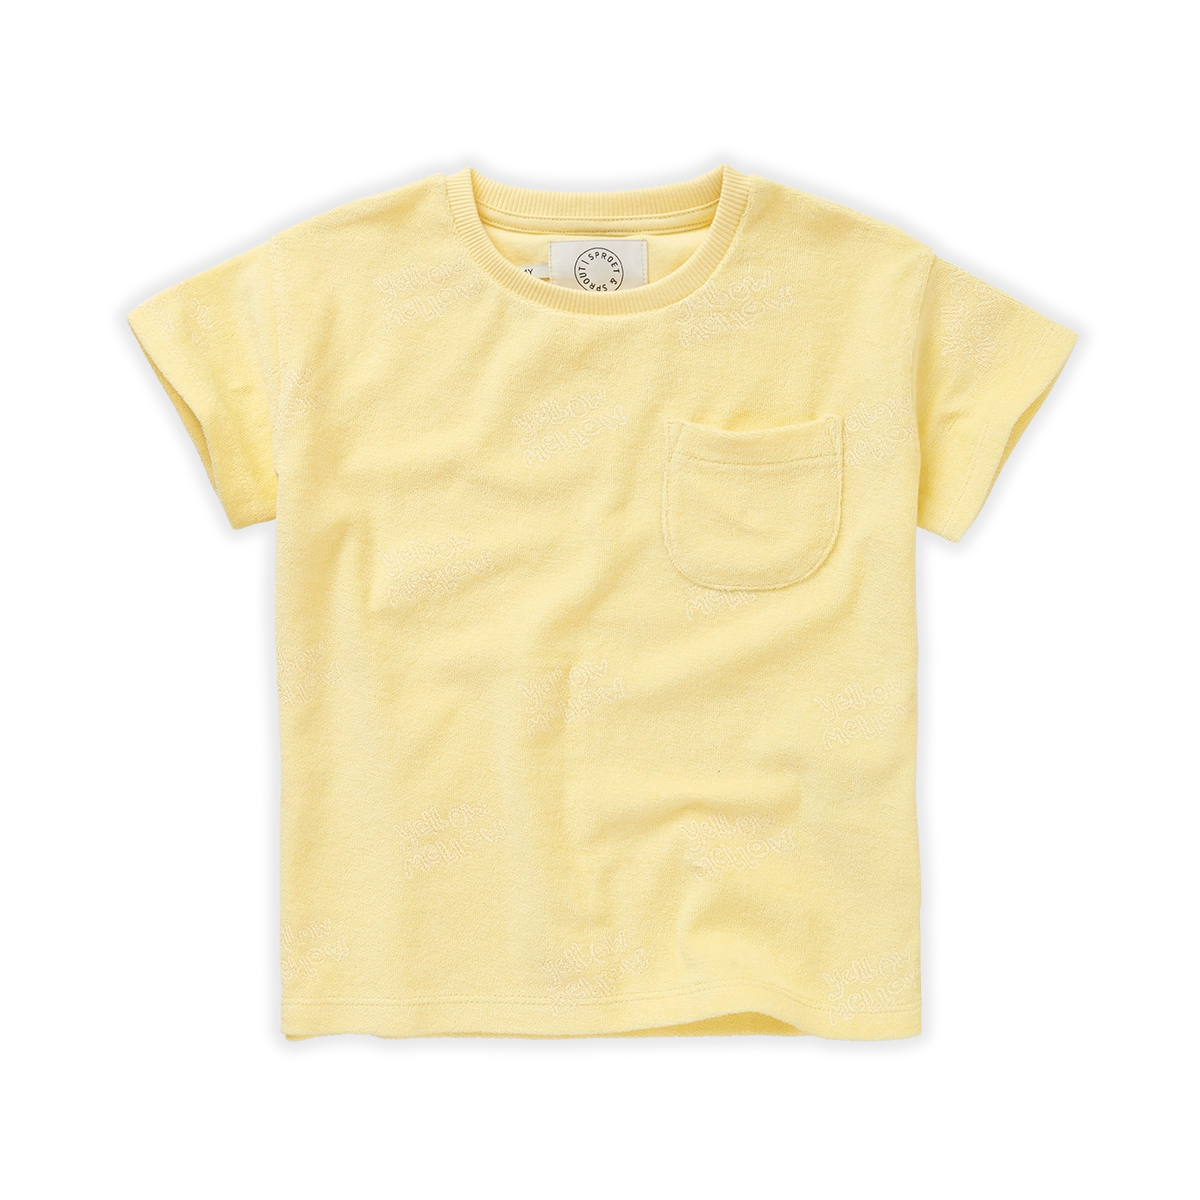 SPROET & SPROUT YELLOW POCKET TSHIRT